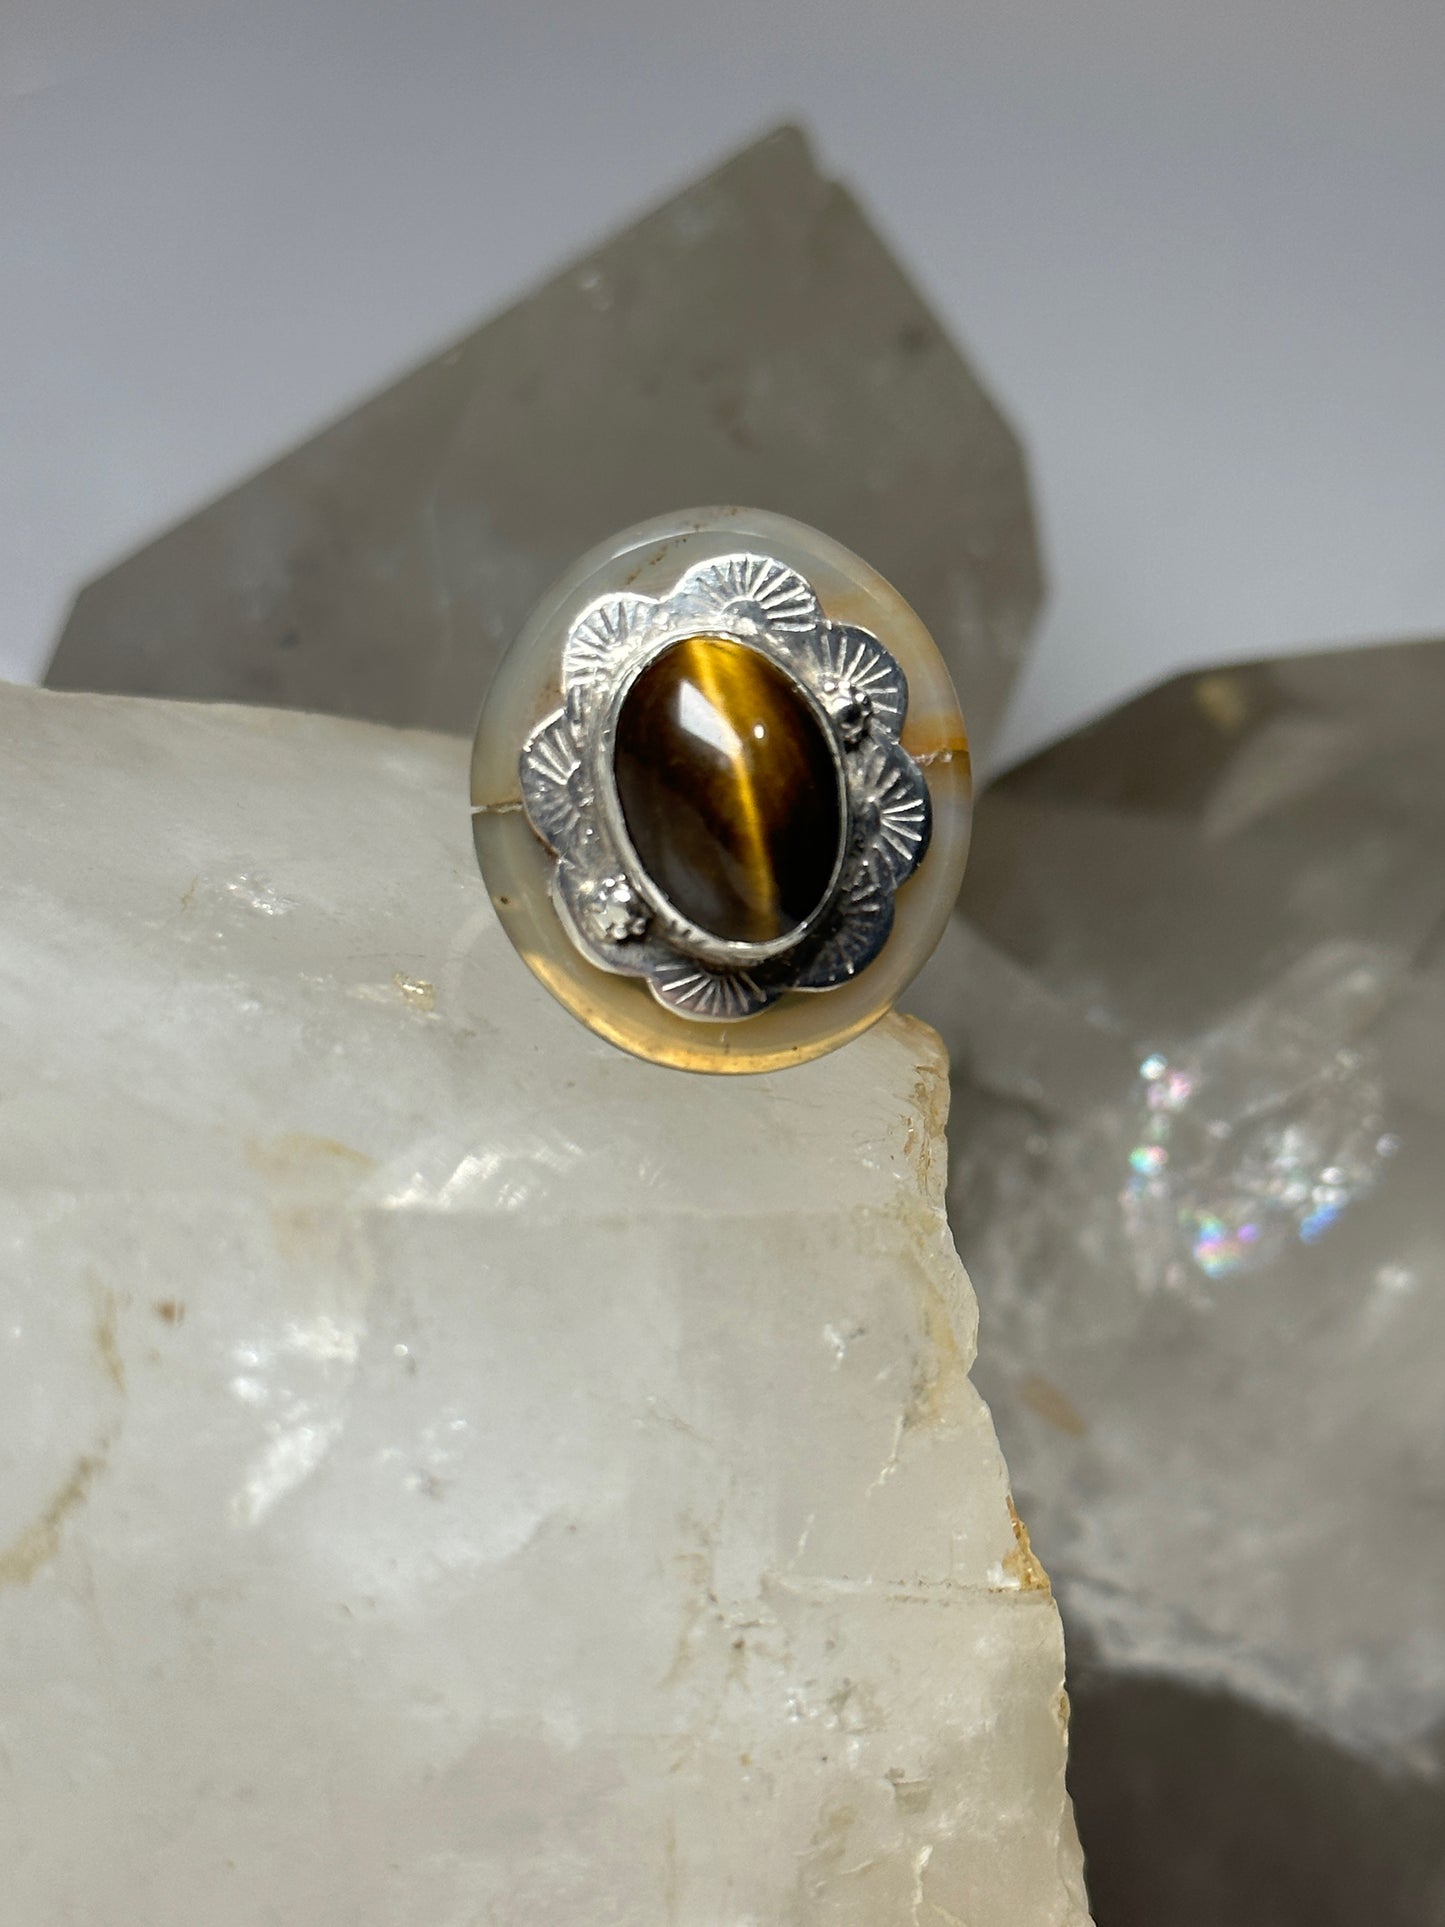 Tiger Eye ring Floral agate  band size 7.50 sterling silver women